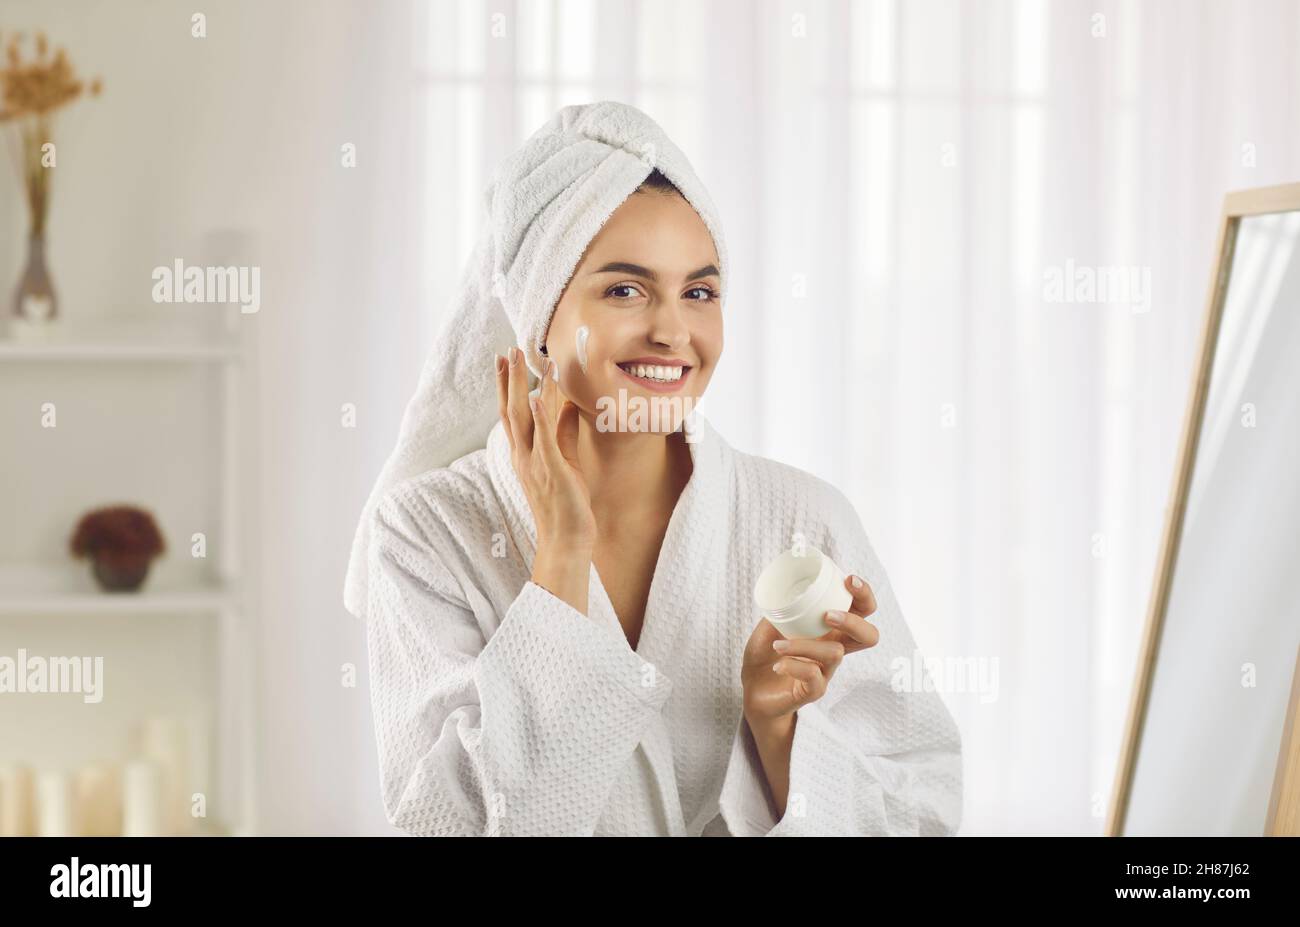 Happy young woman with towel on head smiling while applying anti wrinkle cream on her face Stock Photo